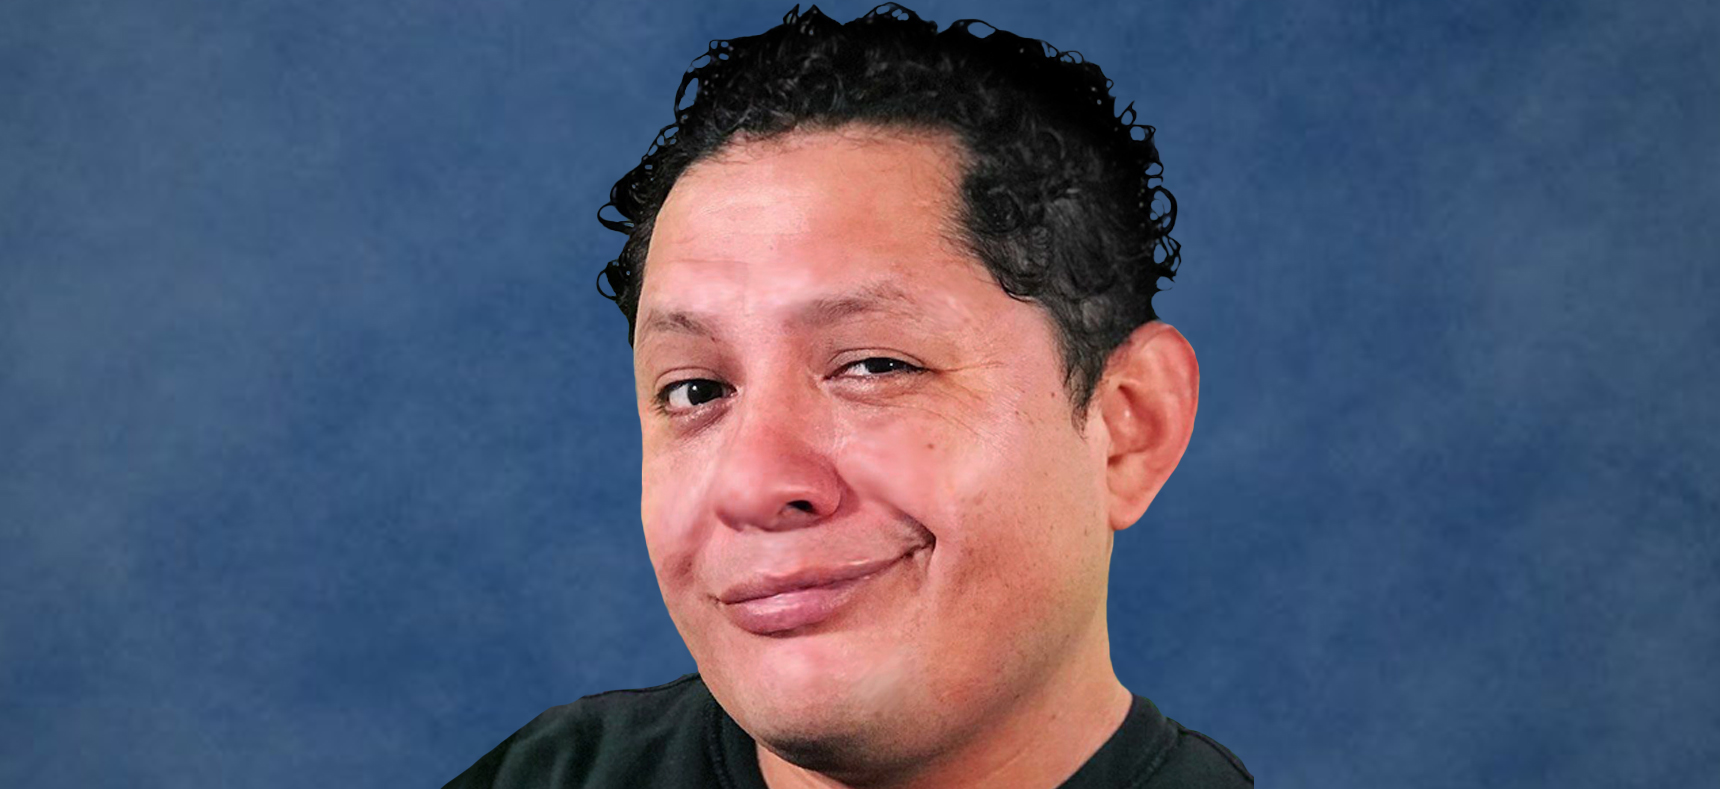 The “People’s Comedian” Benji GarciaReyes comes to Comedy Heights at Twiggs this Saturday night.